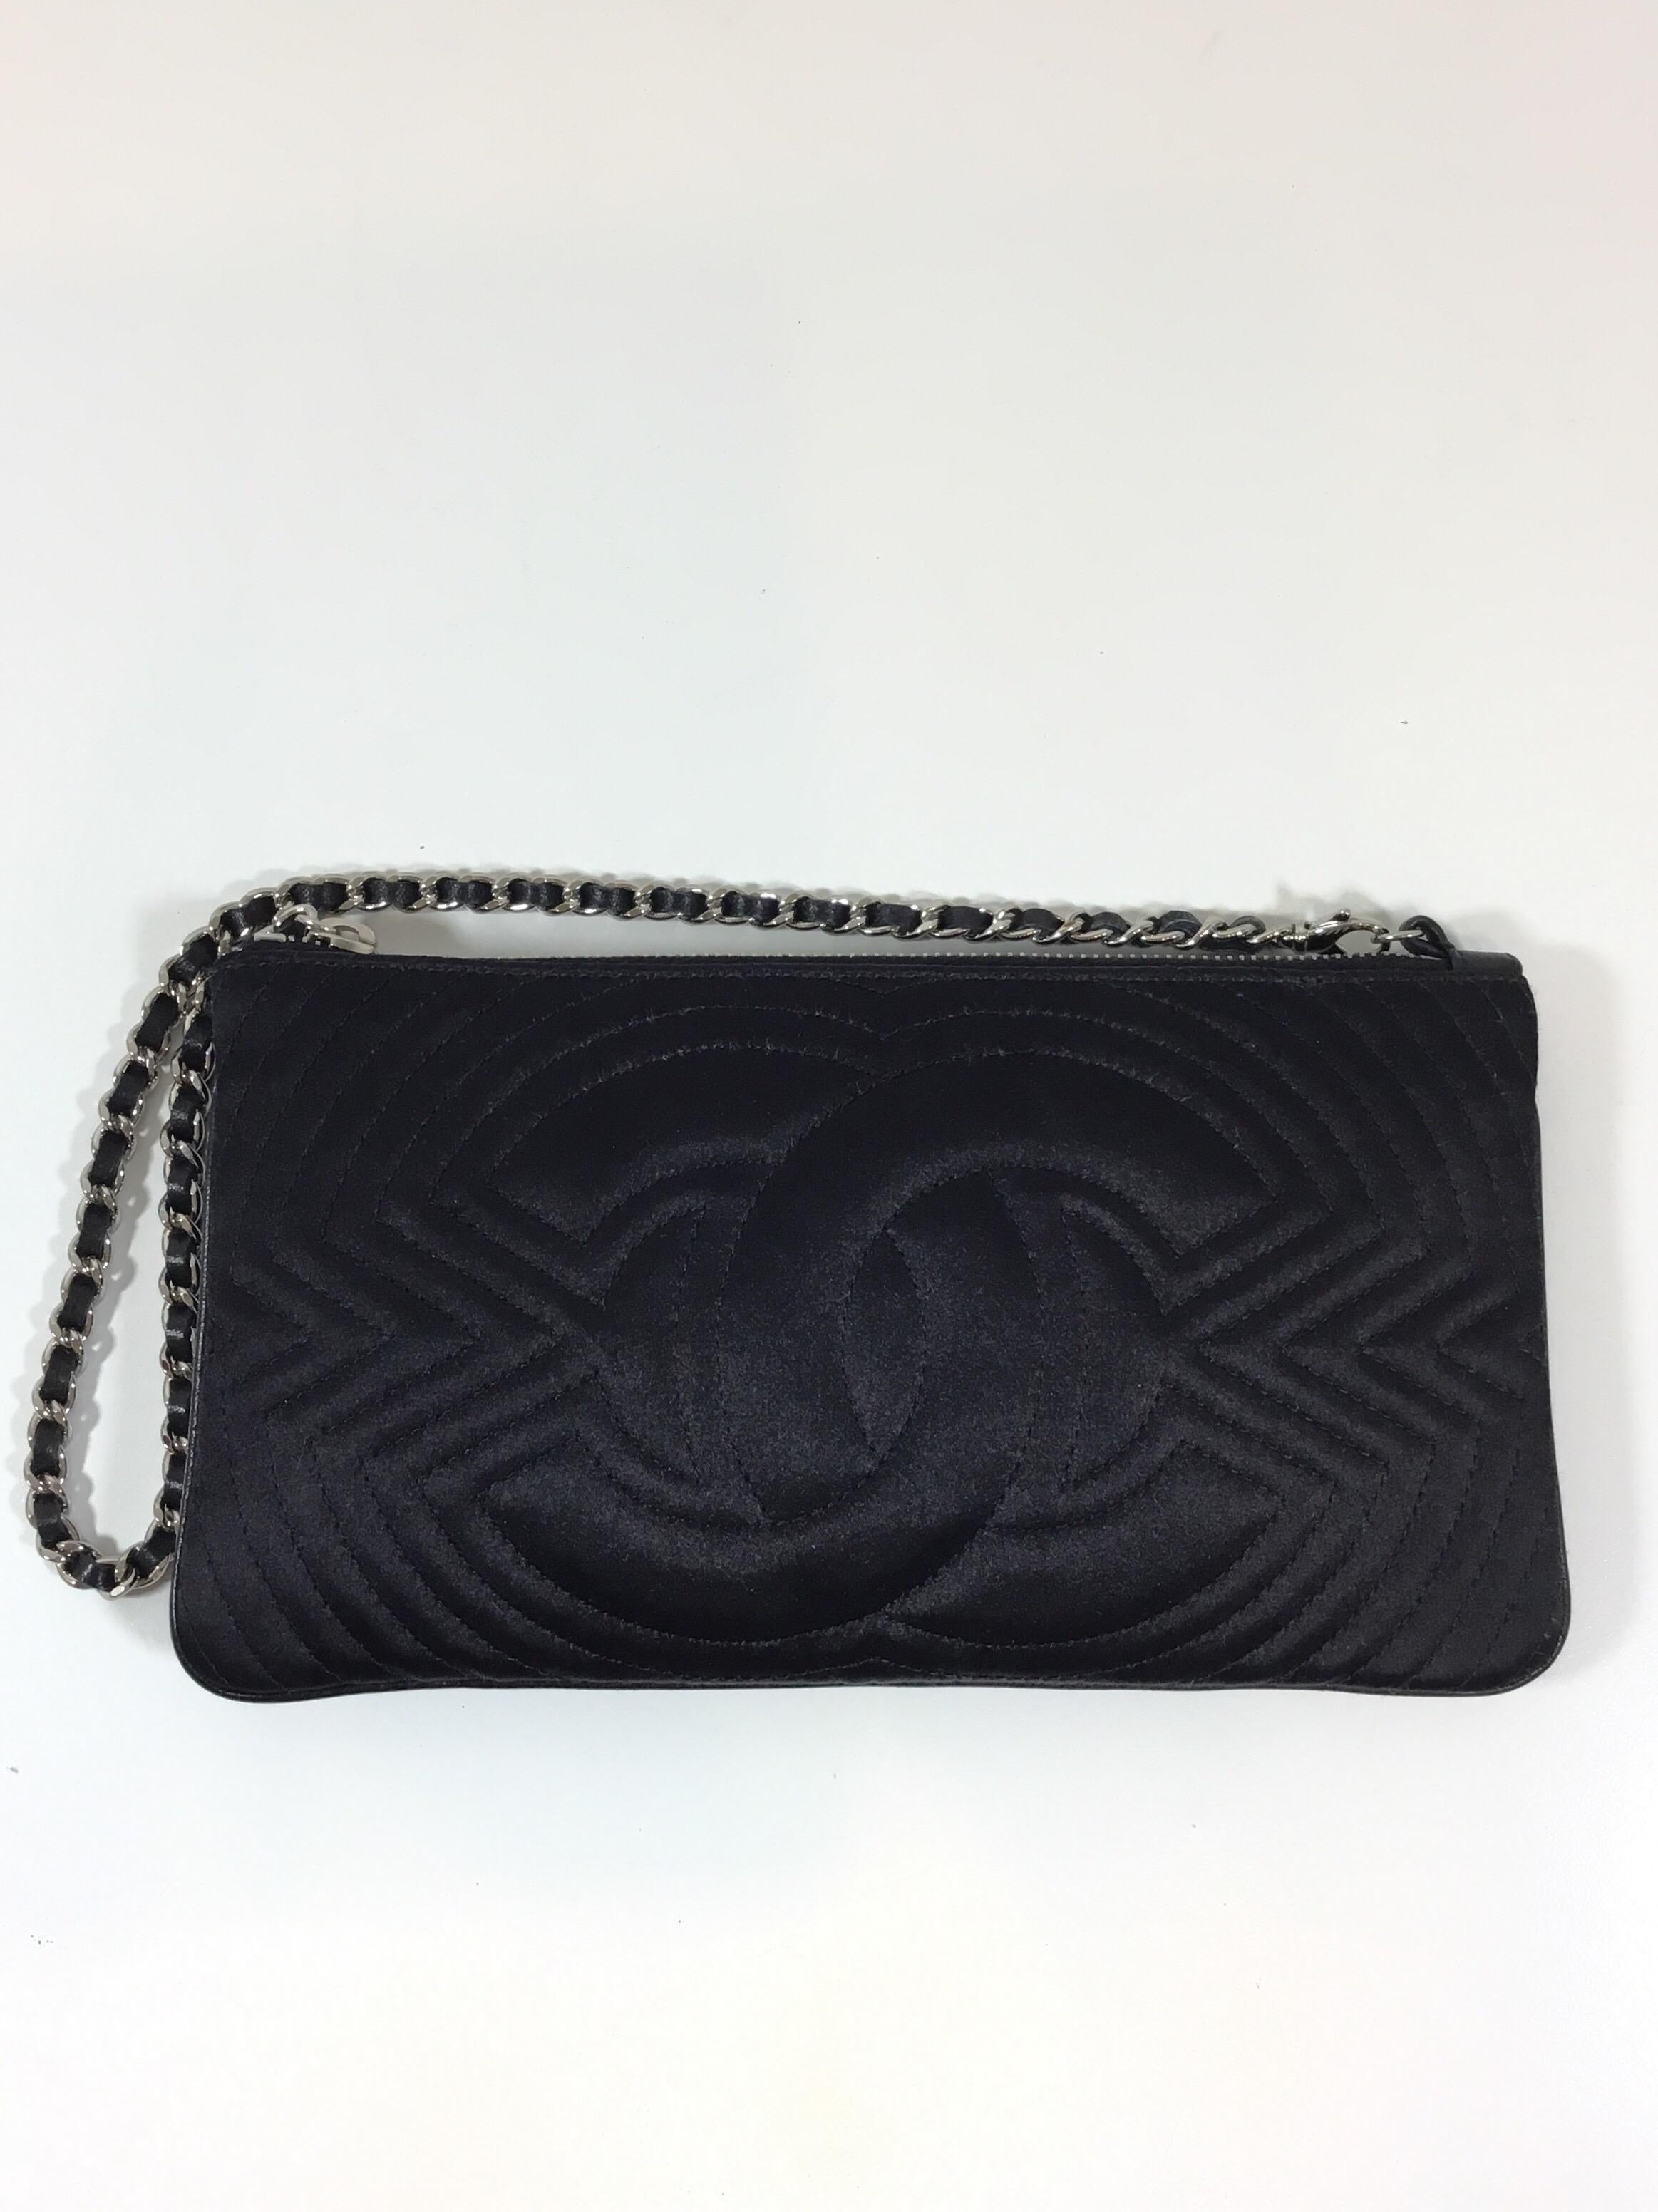 Chanel quilted satin clutch in black with a leather and silvertone chain handle, chain handle has a clip clasp, zipper top closure. Interior is fully lined with a slip pocket. Made in France. Bag includes original dustbag and authenticity card.